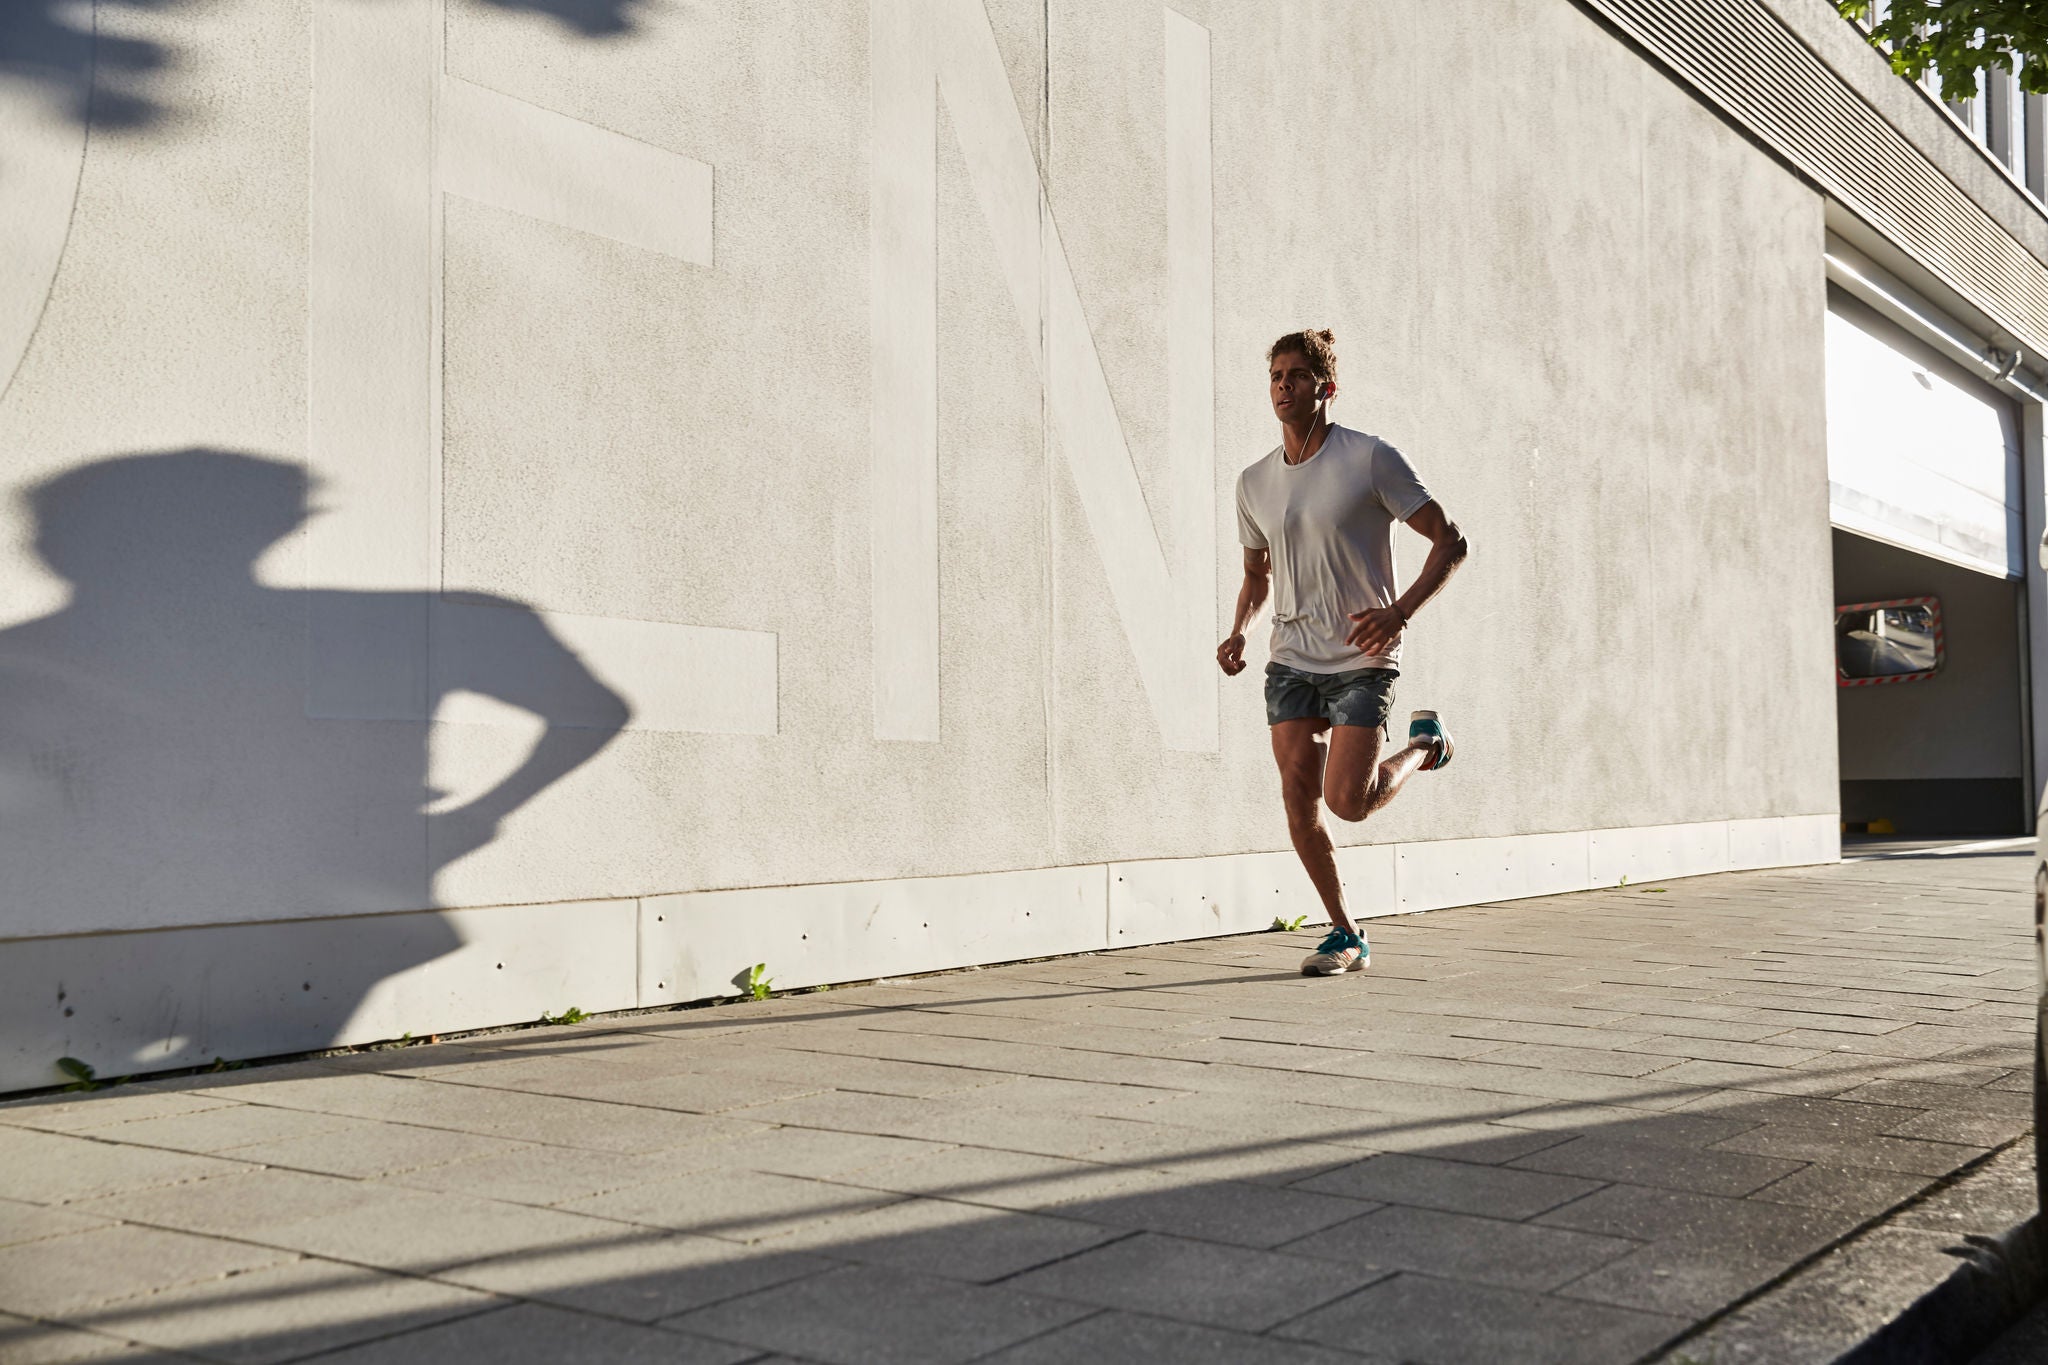 Smart running shoes can analyse your running style